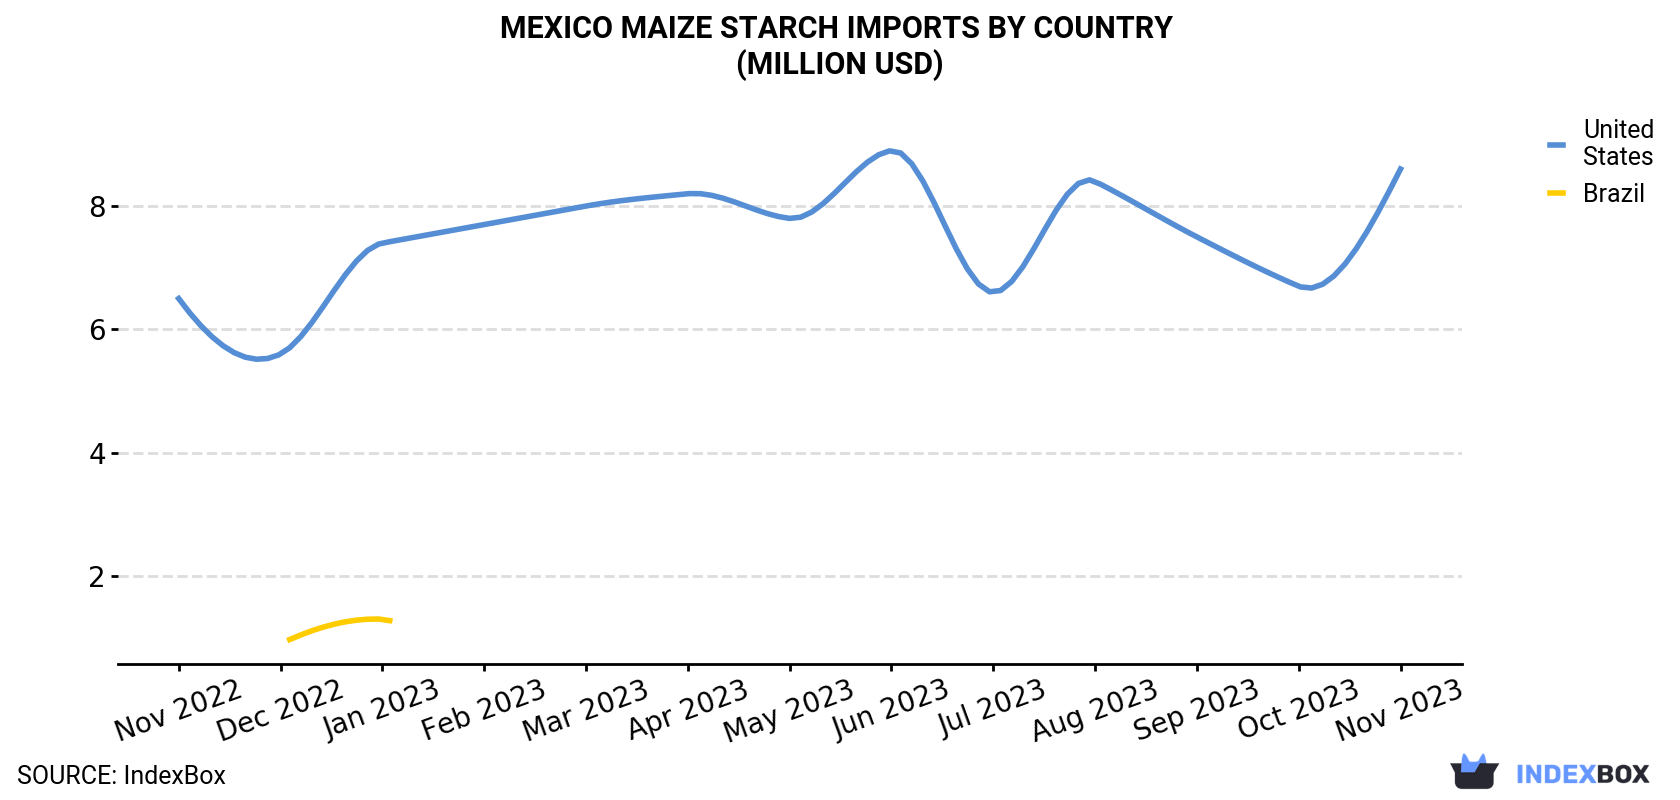 Mexico Maize Starch Imports By Country (Million USD)